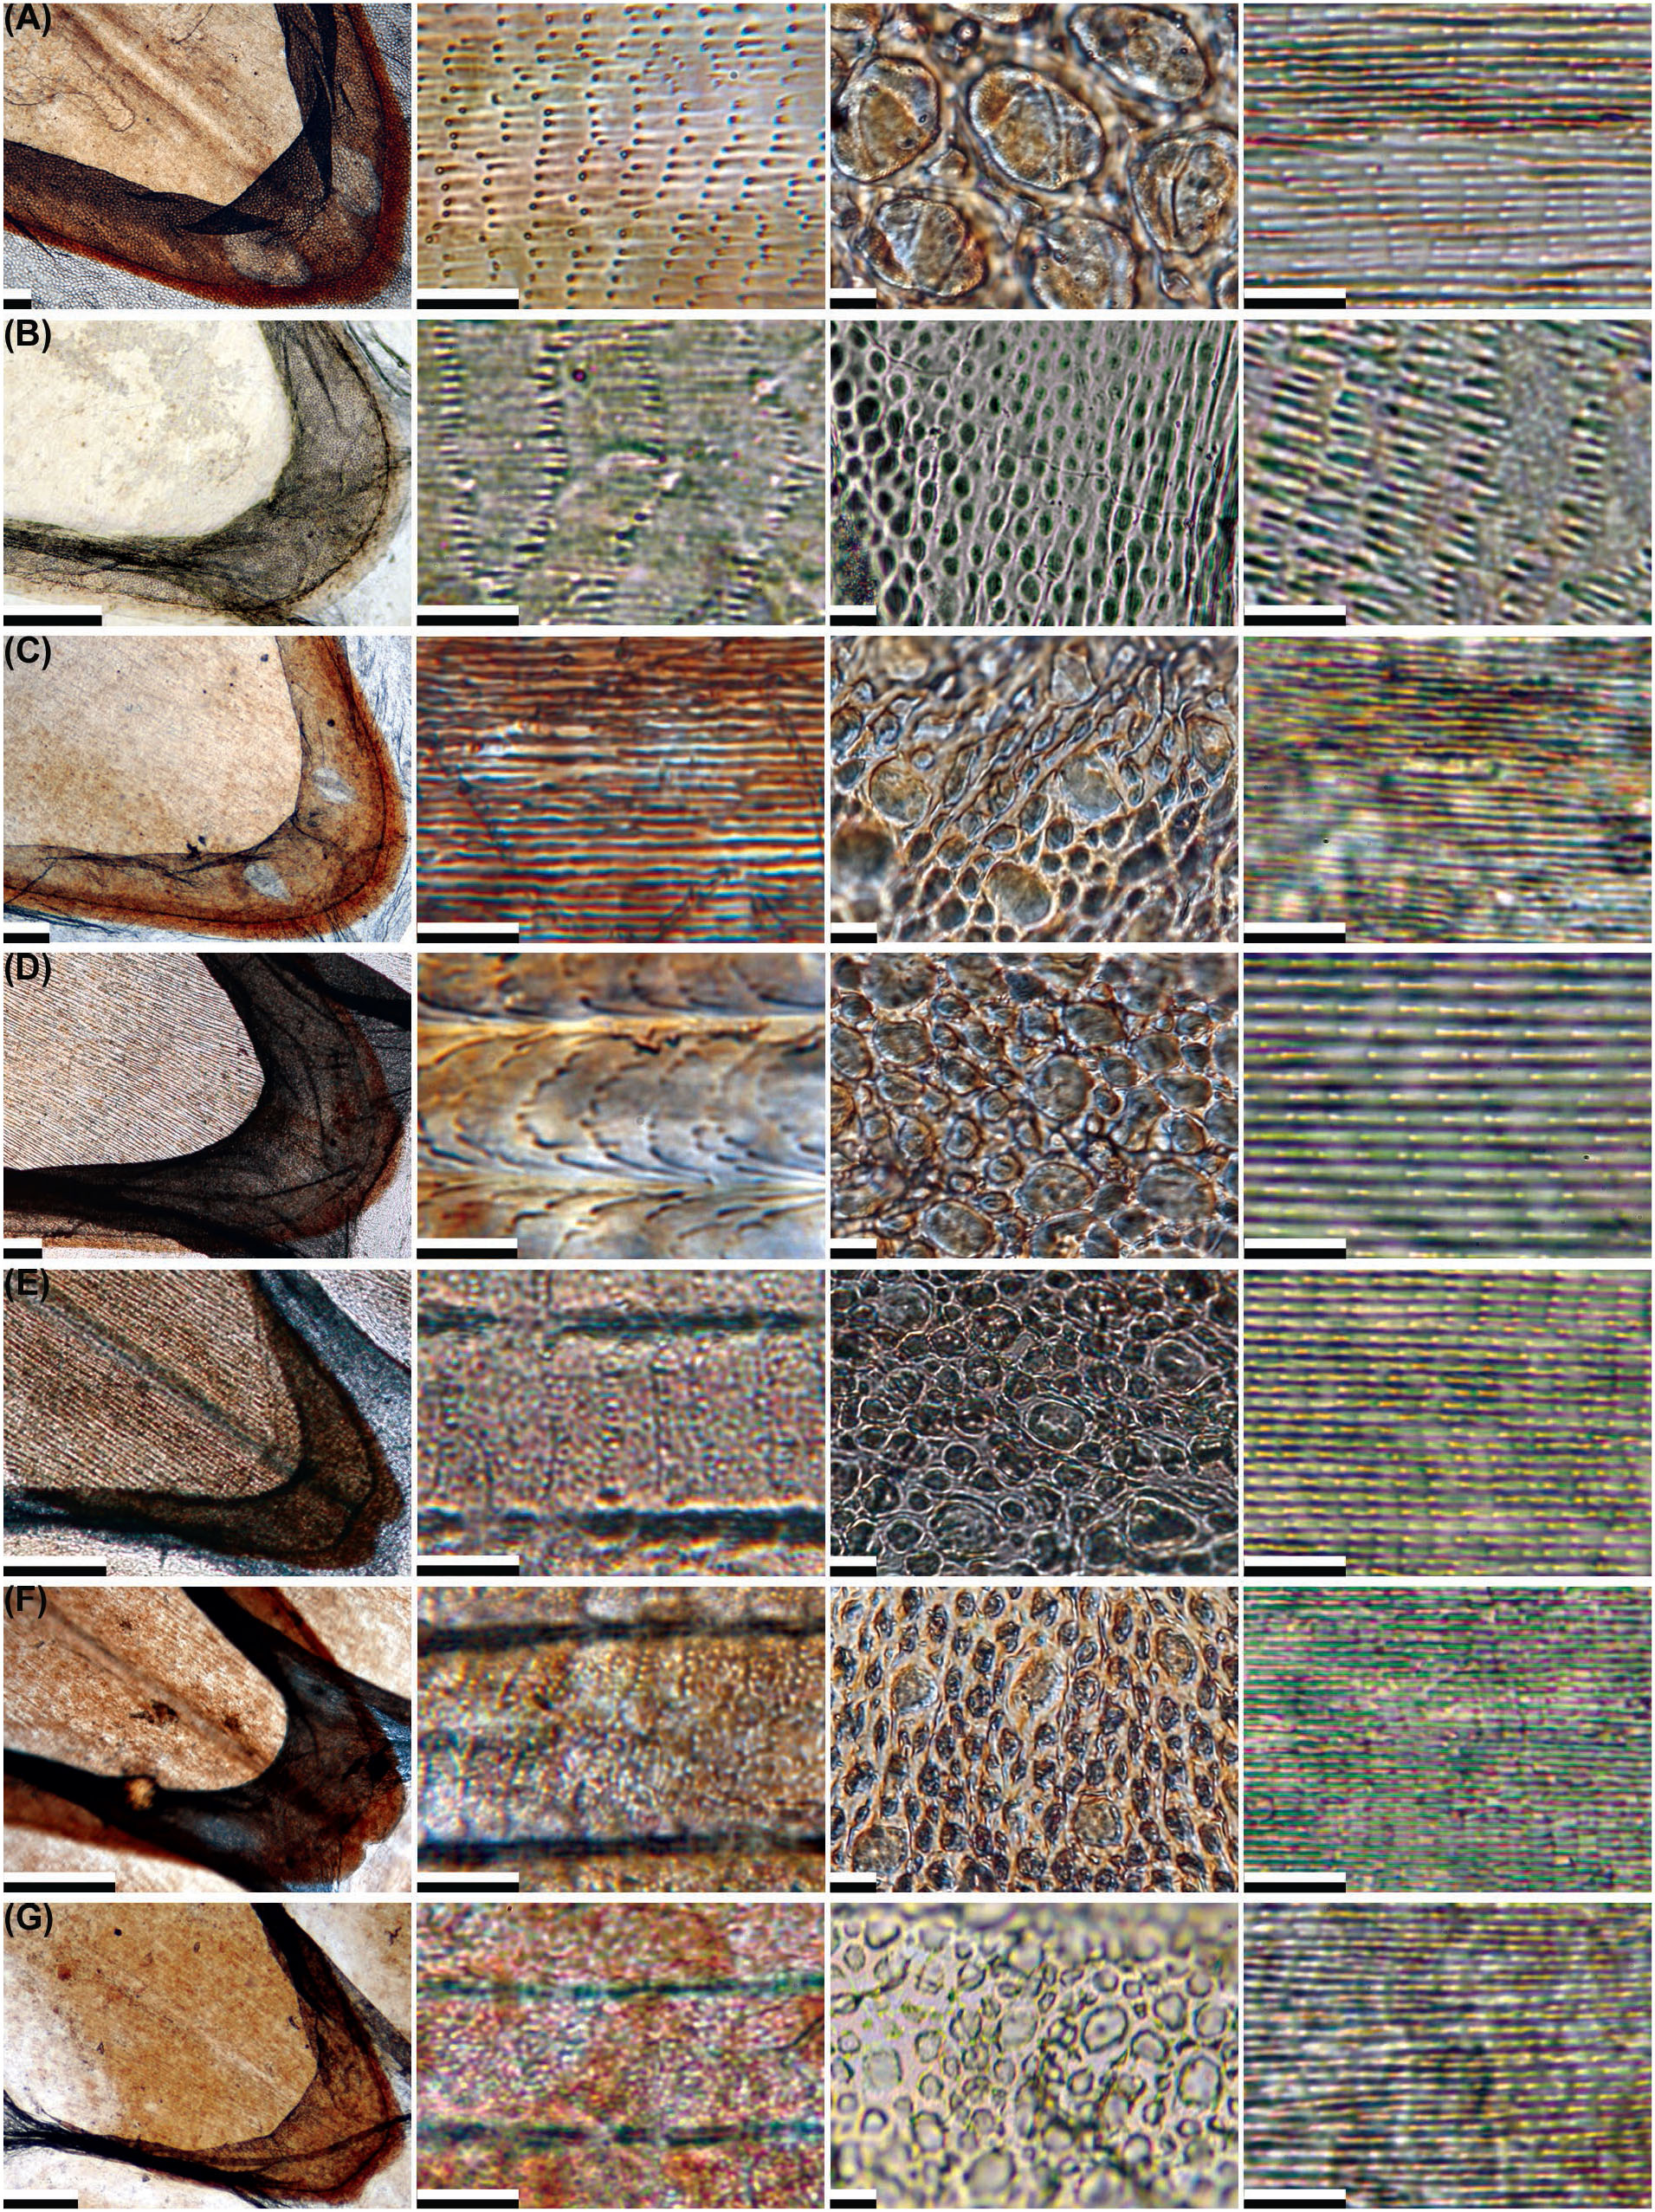 Species Identification Of Fragmented Or Faded Shed Snake Skins By Light Microscopy